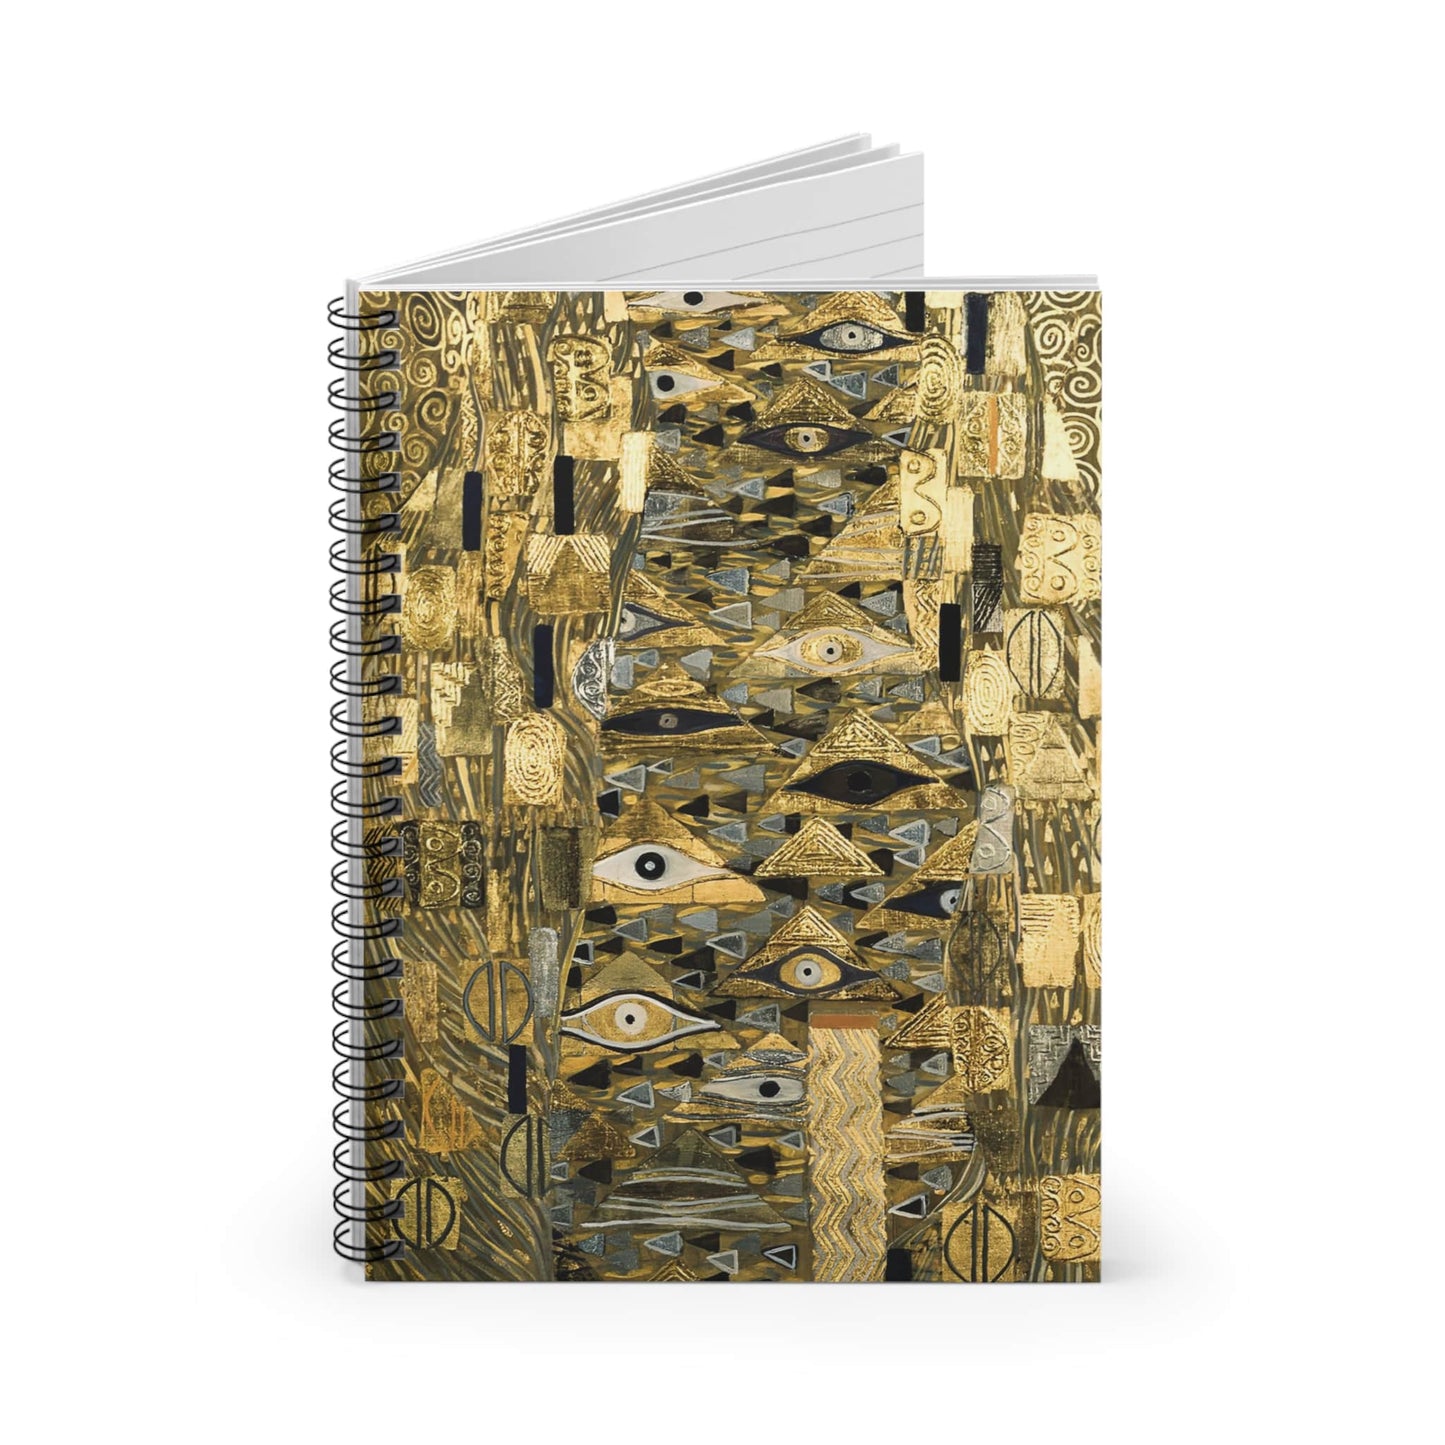 The Lady in Gold Spiral Notebook Standing up on White Desk